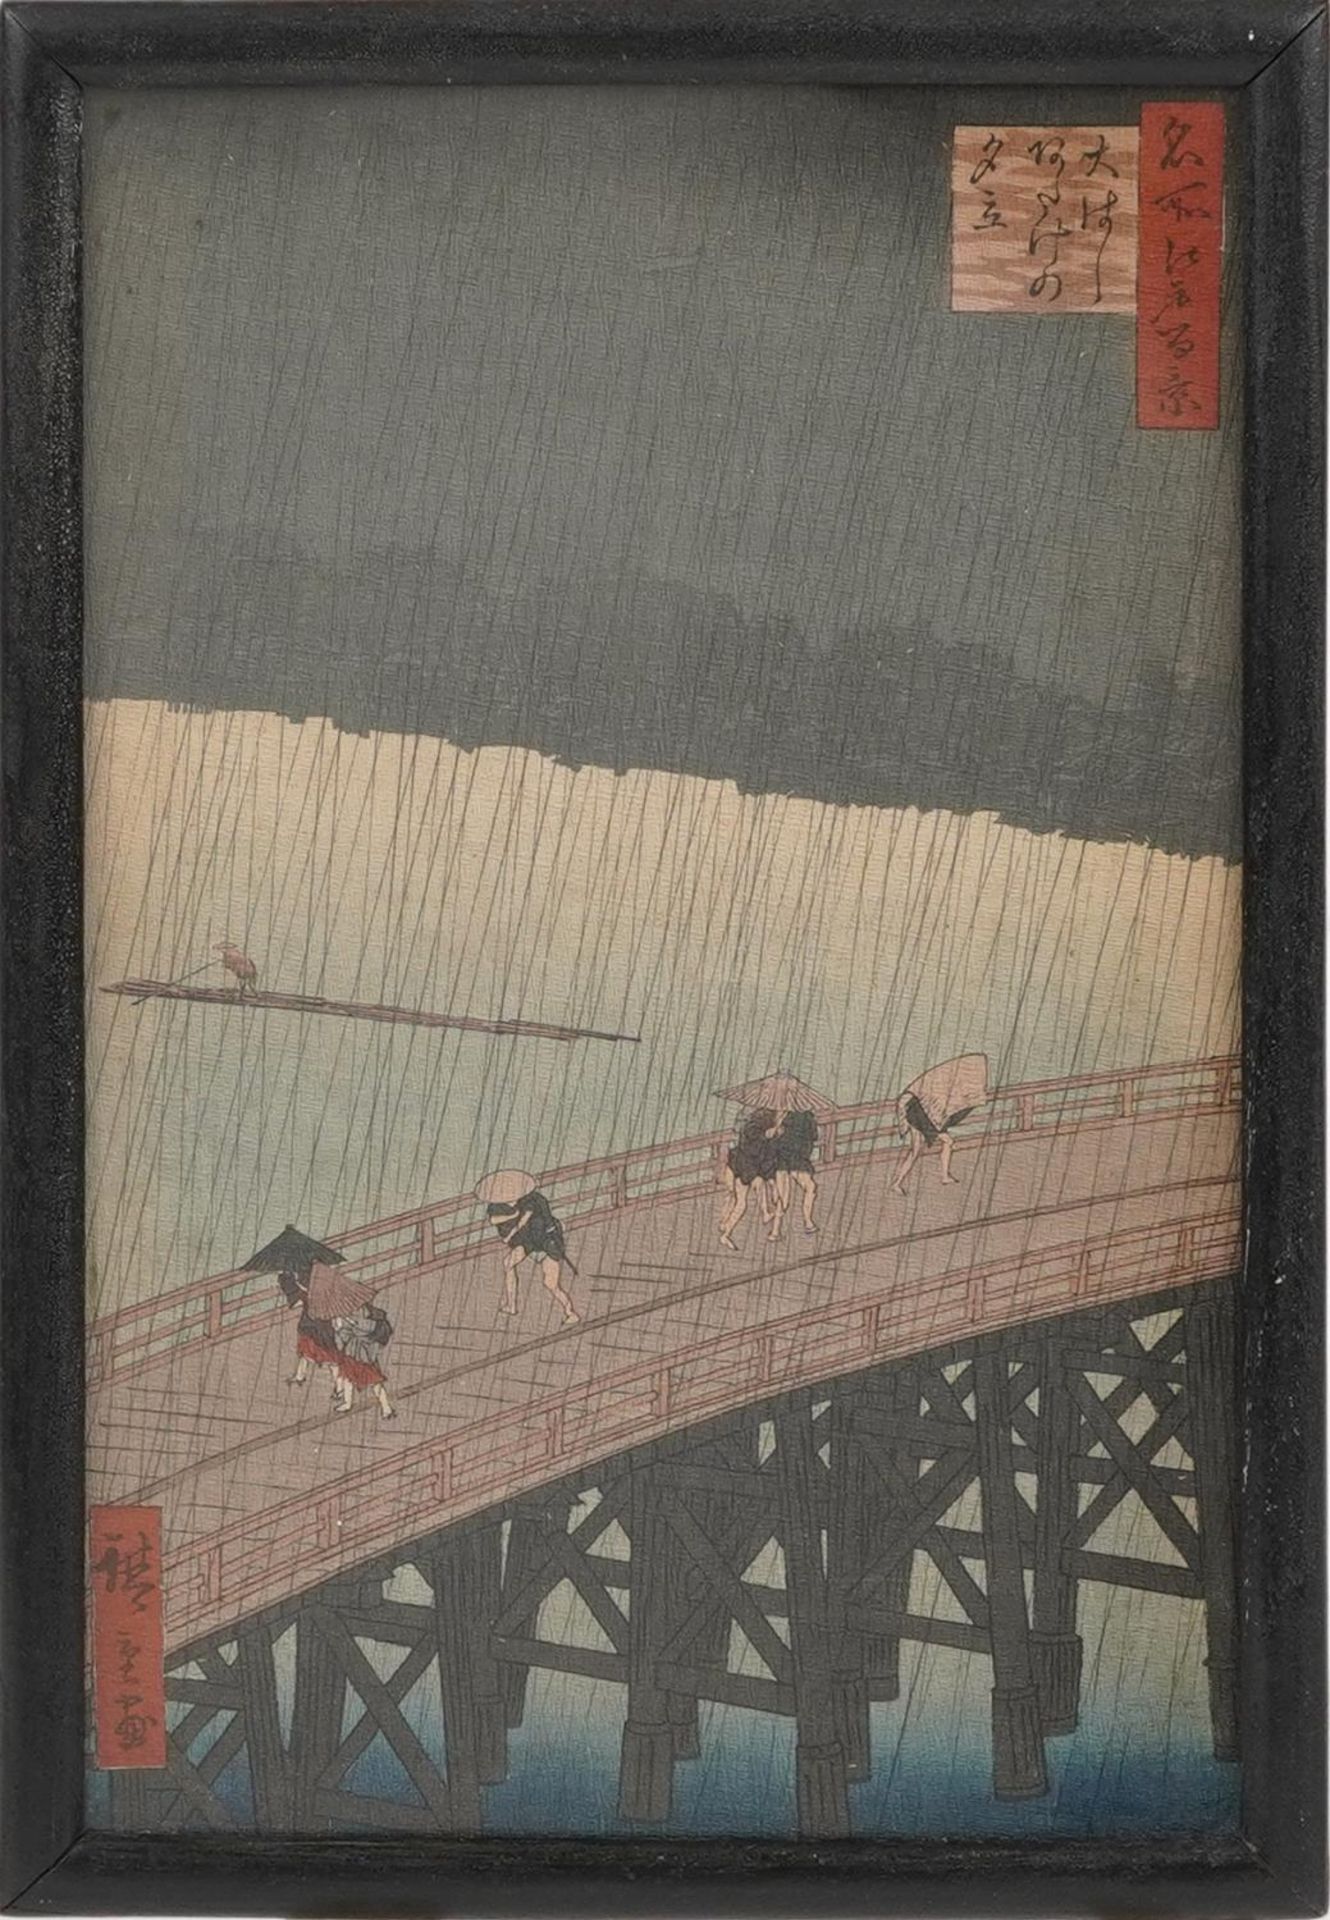 Figures crossing a bridge, Japanese woodblock print with various character marks, framed and glazed, - Image 2 of 7